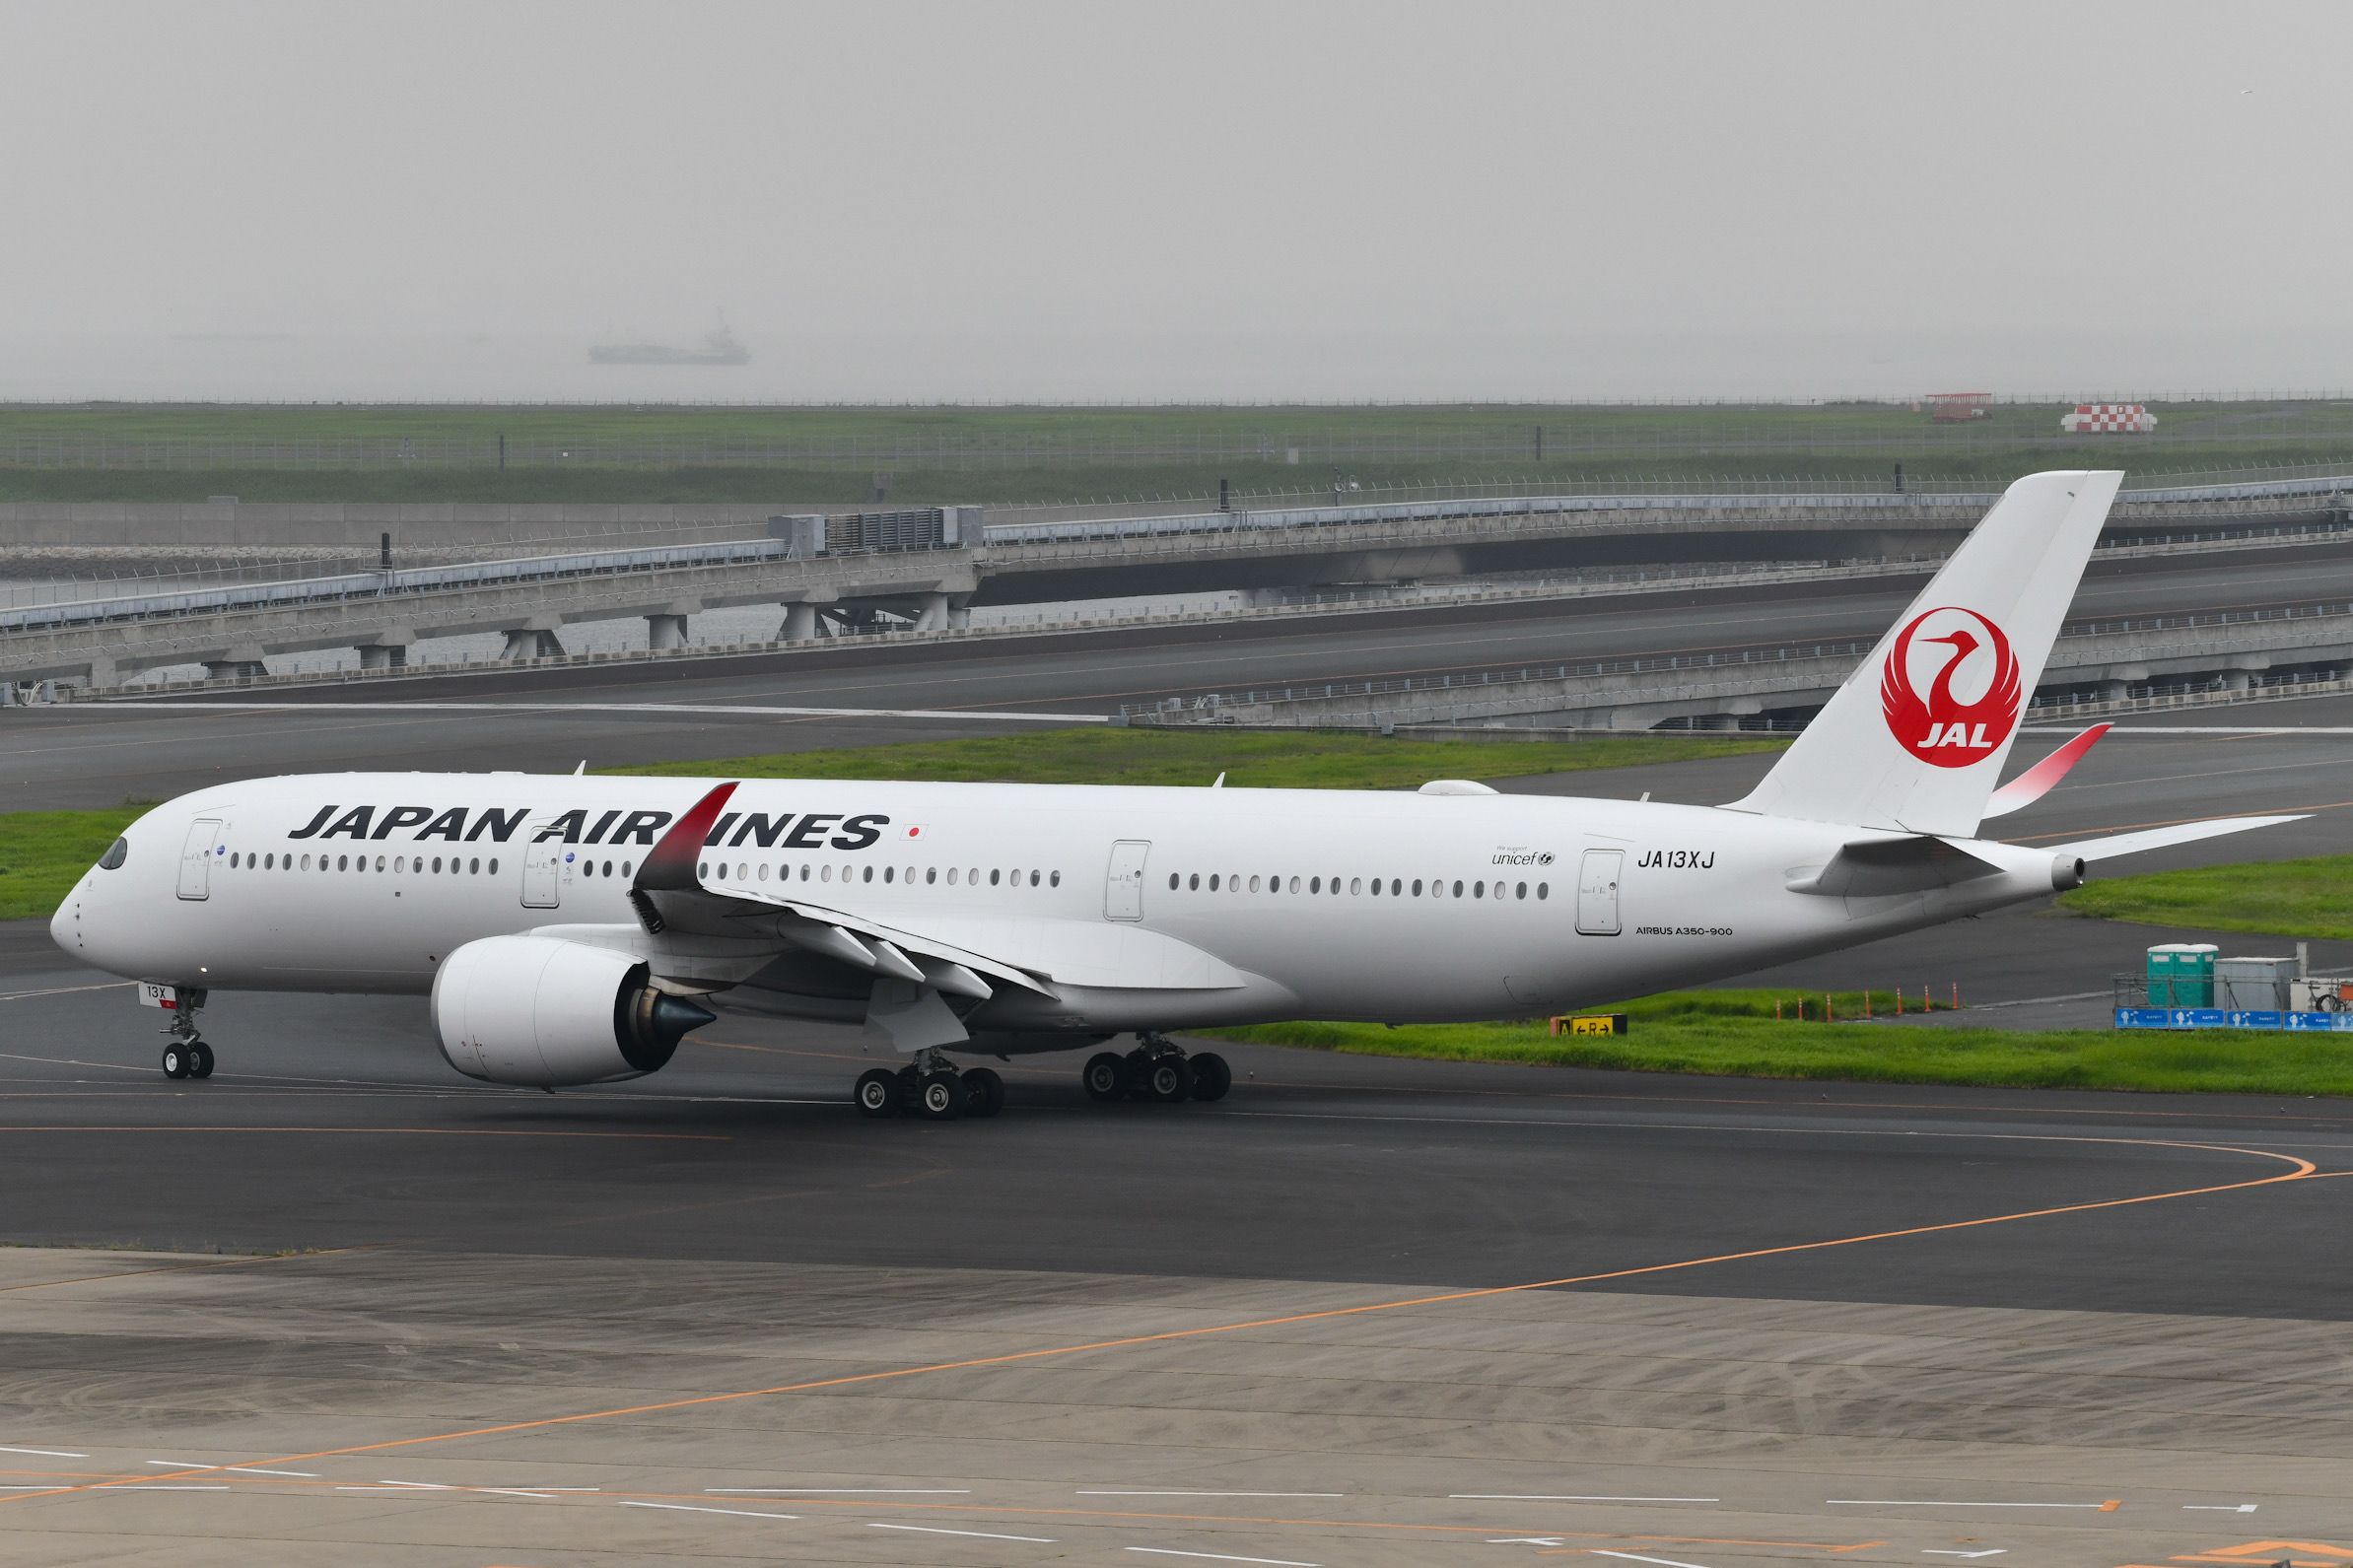 A Japan Airlines A350-941 on an airport apron.